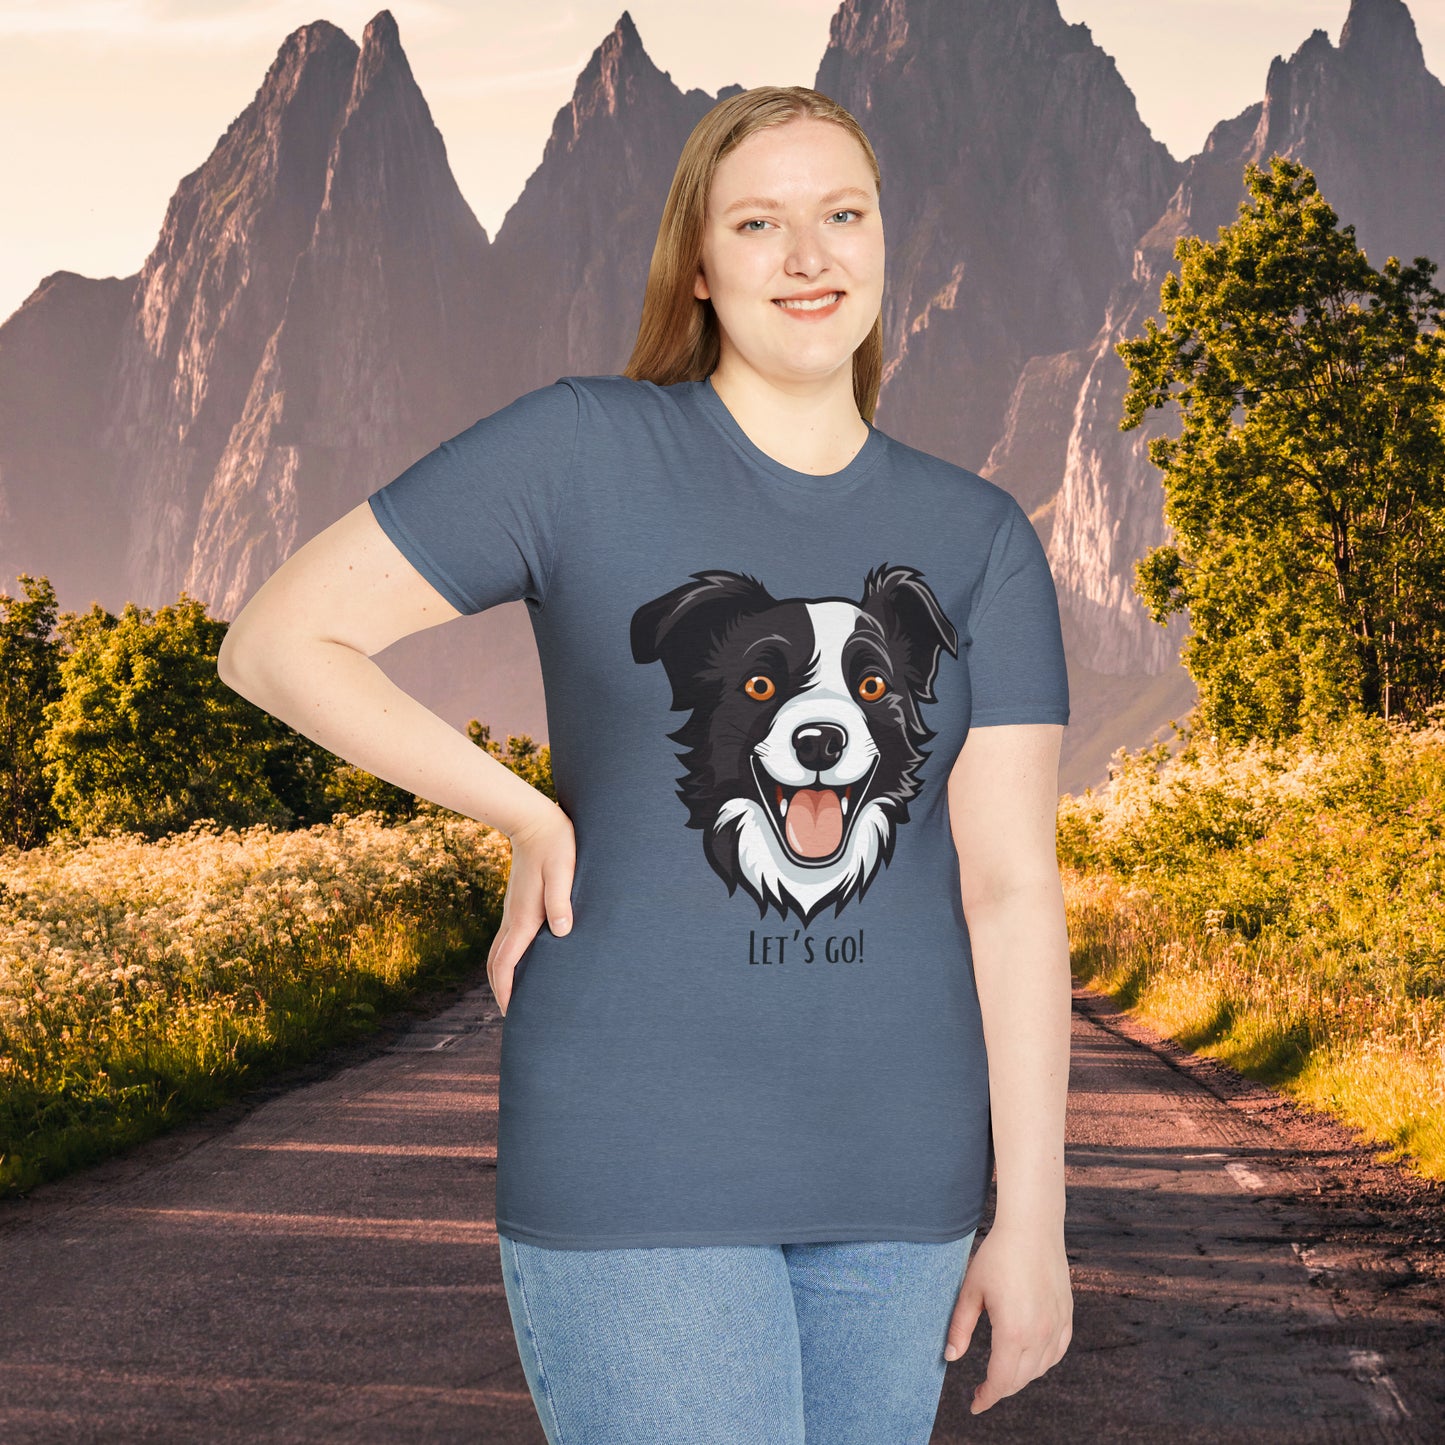 Dog lovers know that look of anticipation and excitement from their dog before a walk, hike or anything fun! This is a Unisex Softstyle T-Shirt.